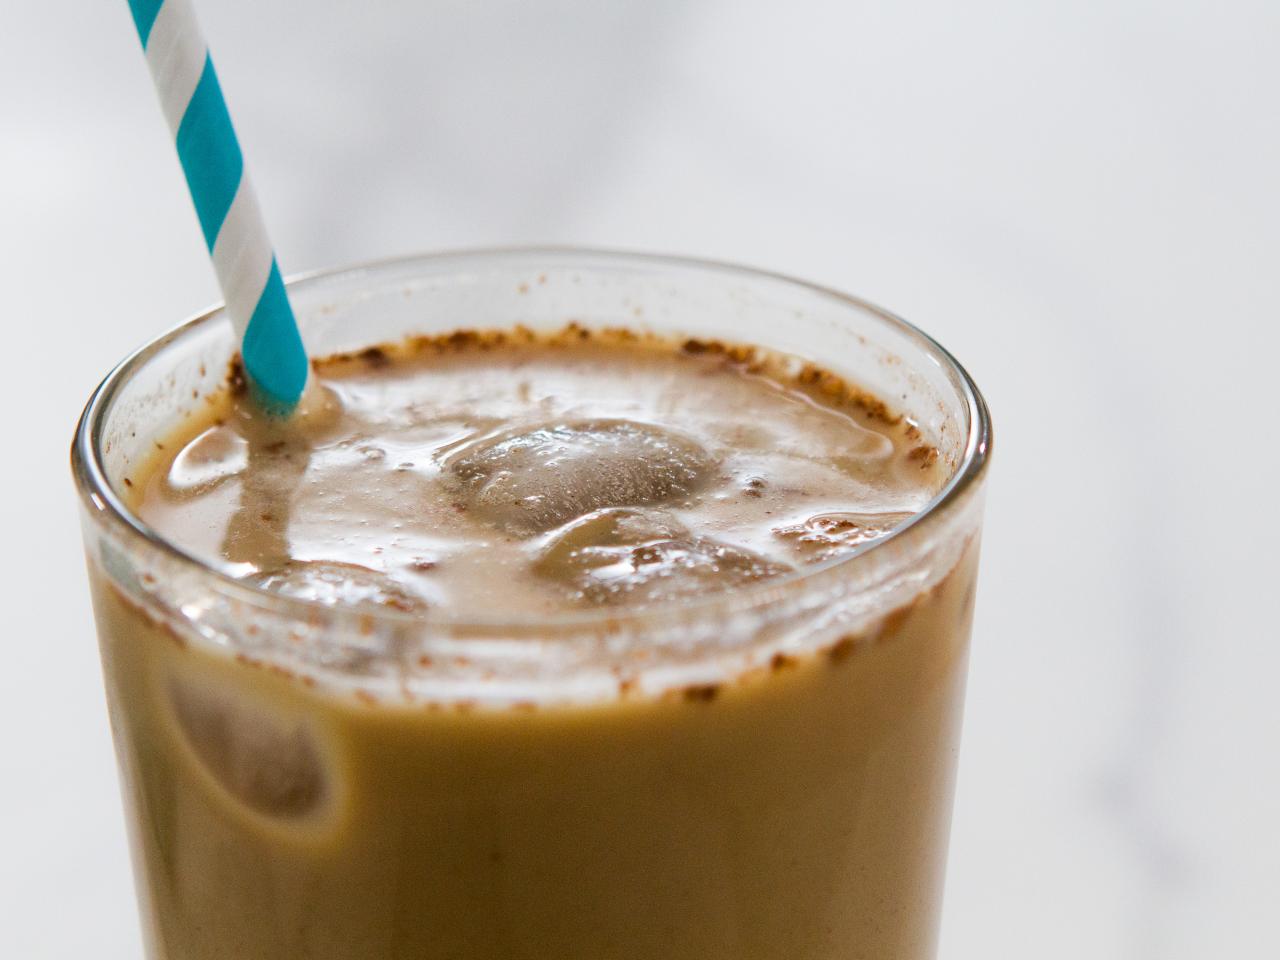 https://food.fnr.sndimg.com/content/dam/images/food/fullset/2016/12/17/3/YW0908H_mexican-iced-coffee-with-almond-milk_s4x3.jpg.rend.hgtvcom.1280.960.suffix/1482008568992.jpeg